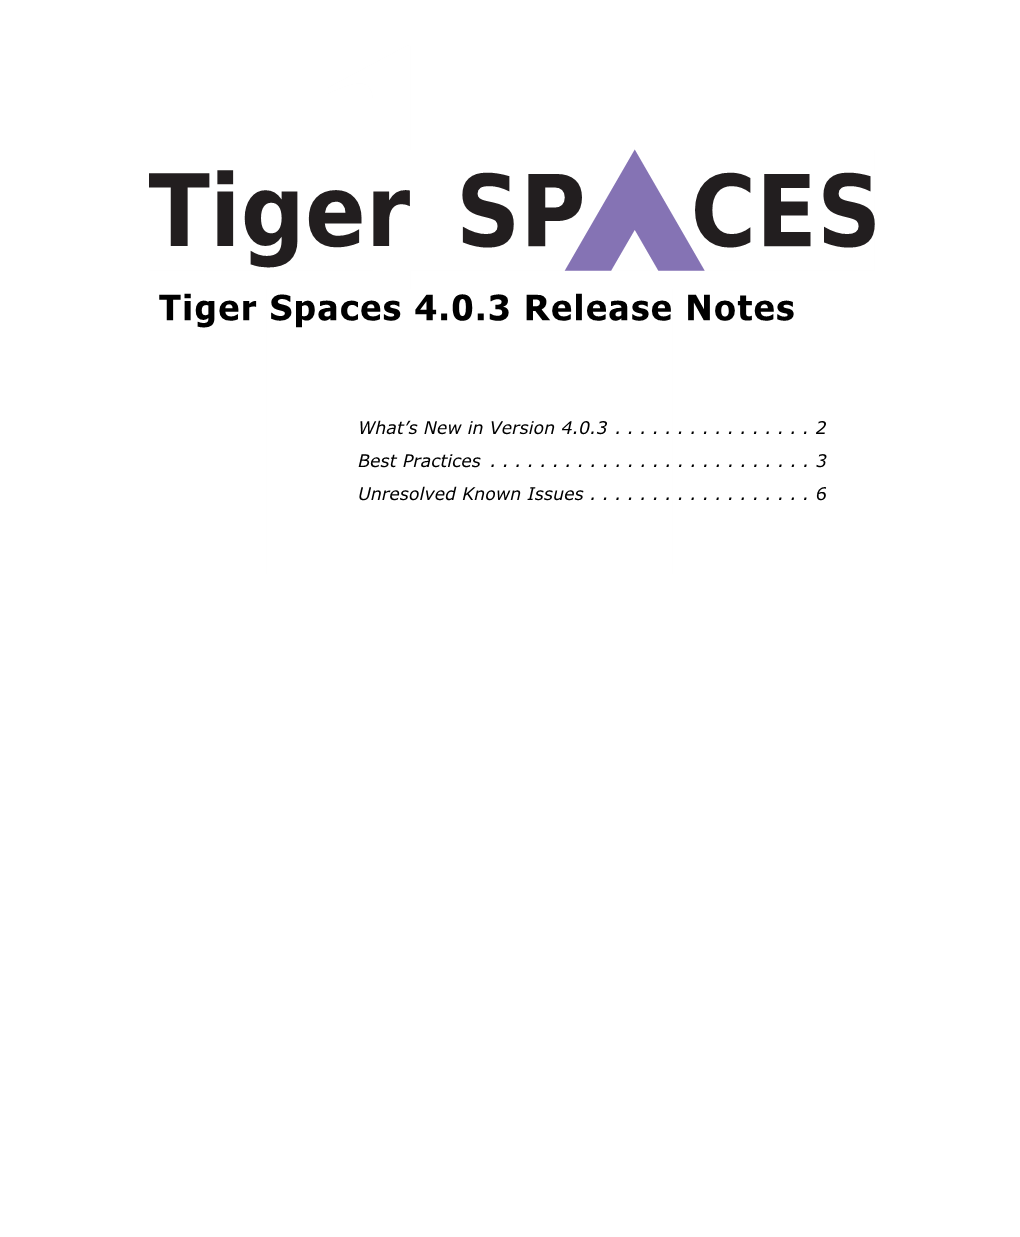 Tiger Spaces 4.0.3 Release Notes